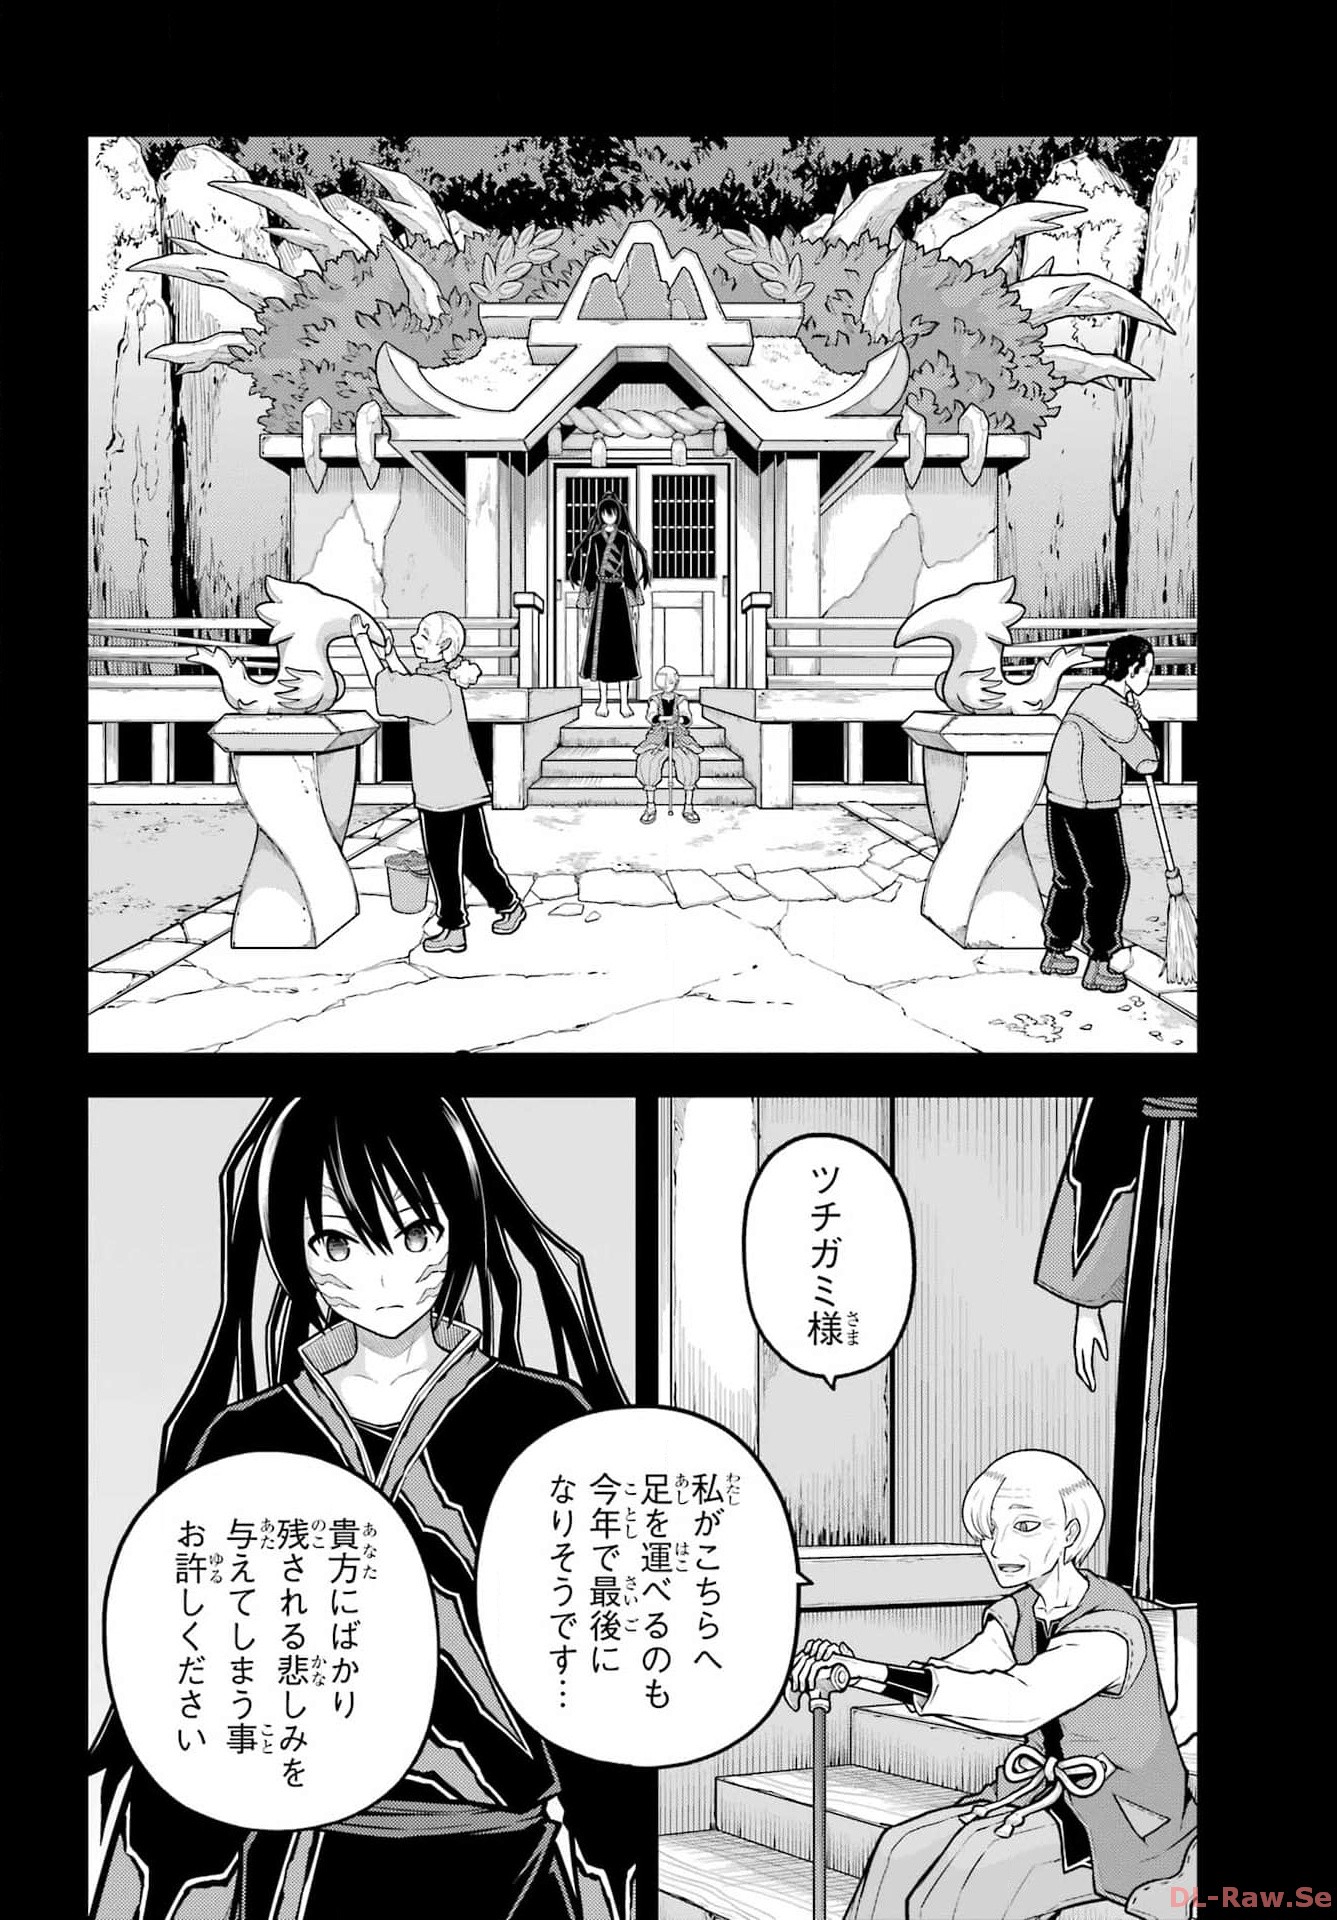 Futoku no Guild - Chapter 79 - Page 2